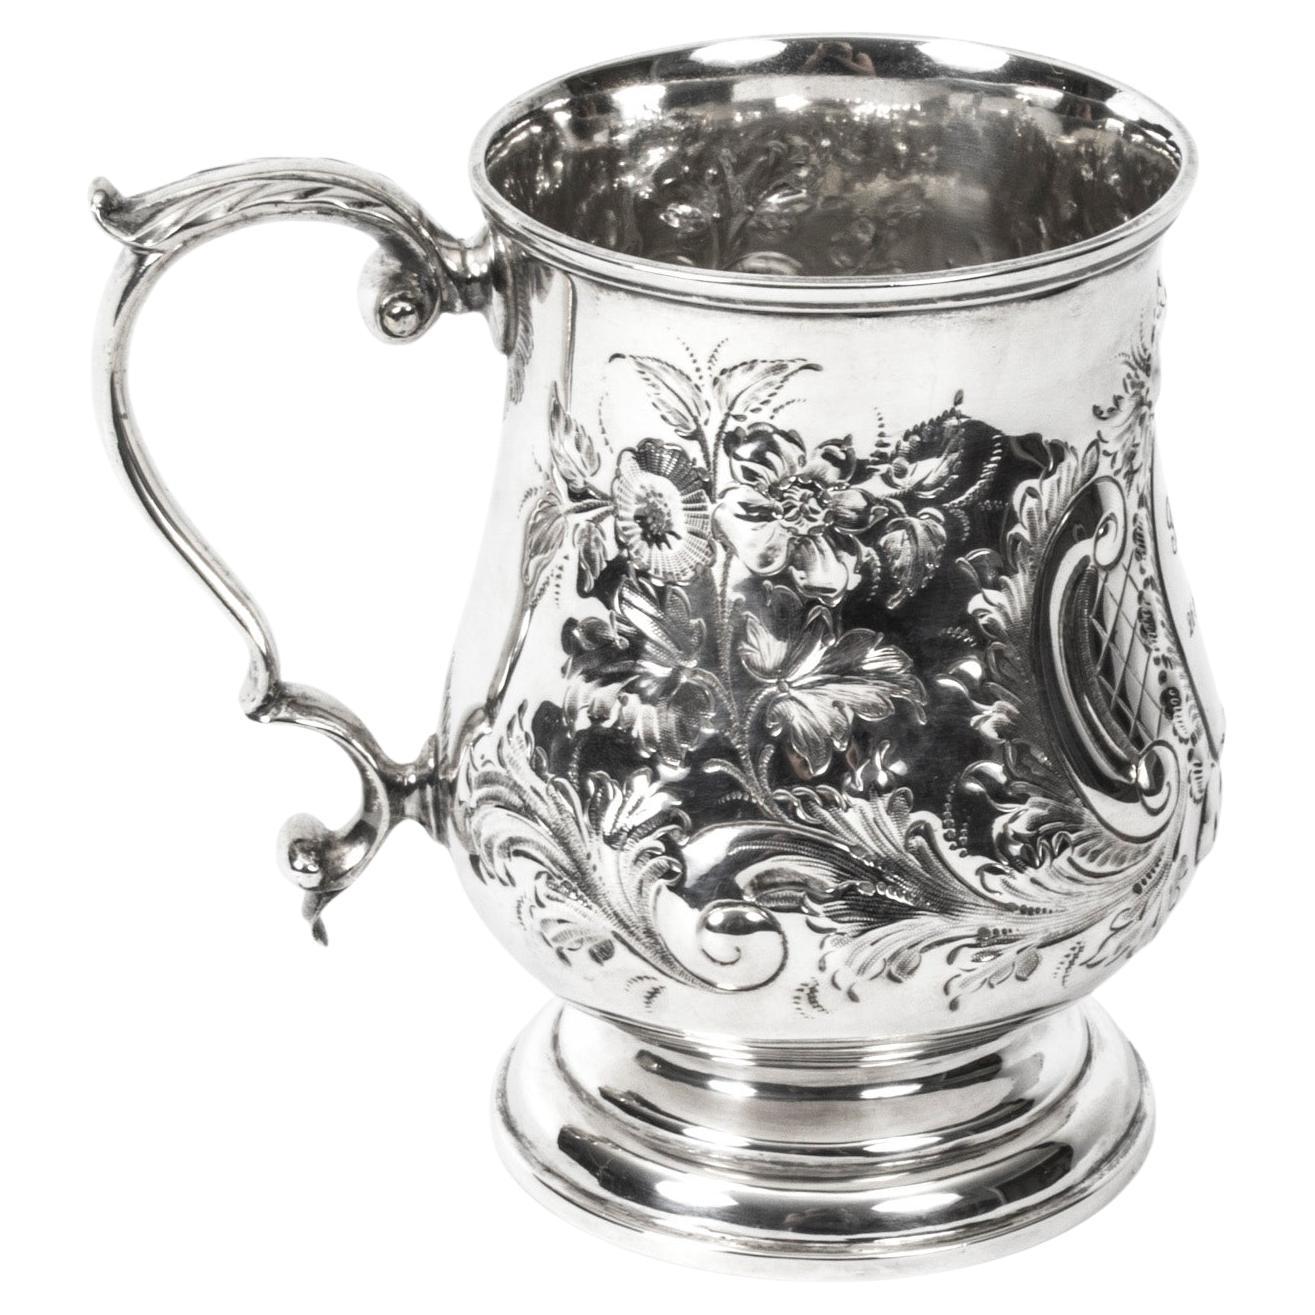 Antique Victorian Silver Plated Embossed and Engraved Mug 19th Century